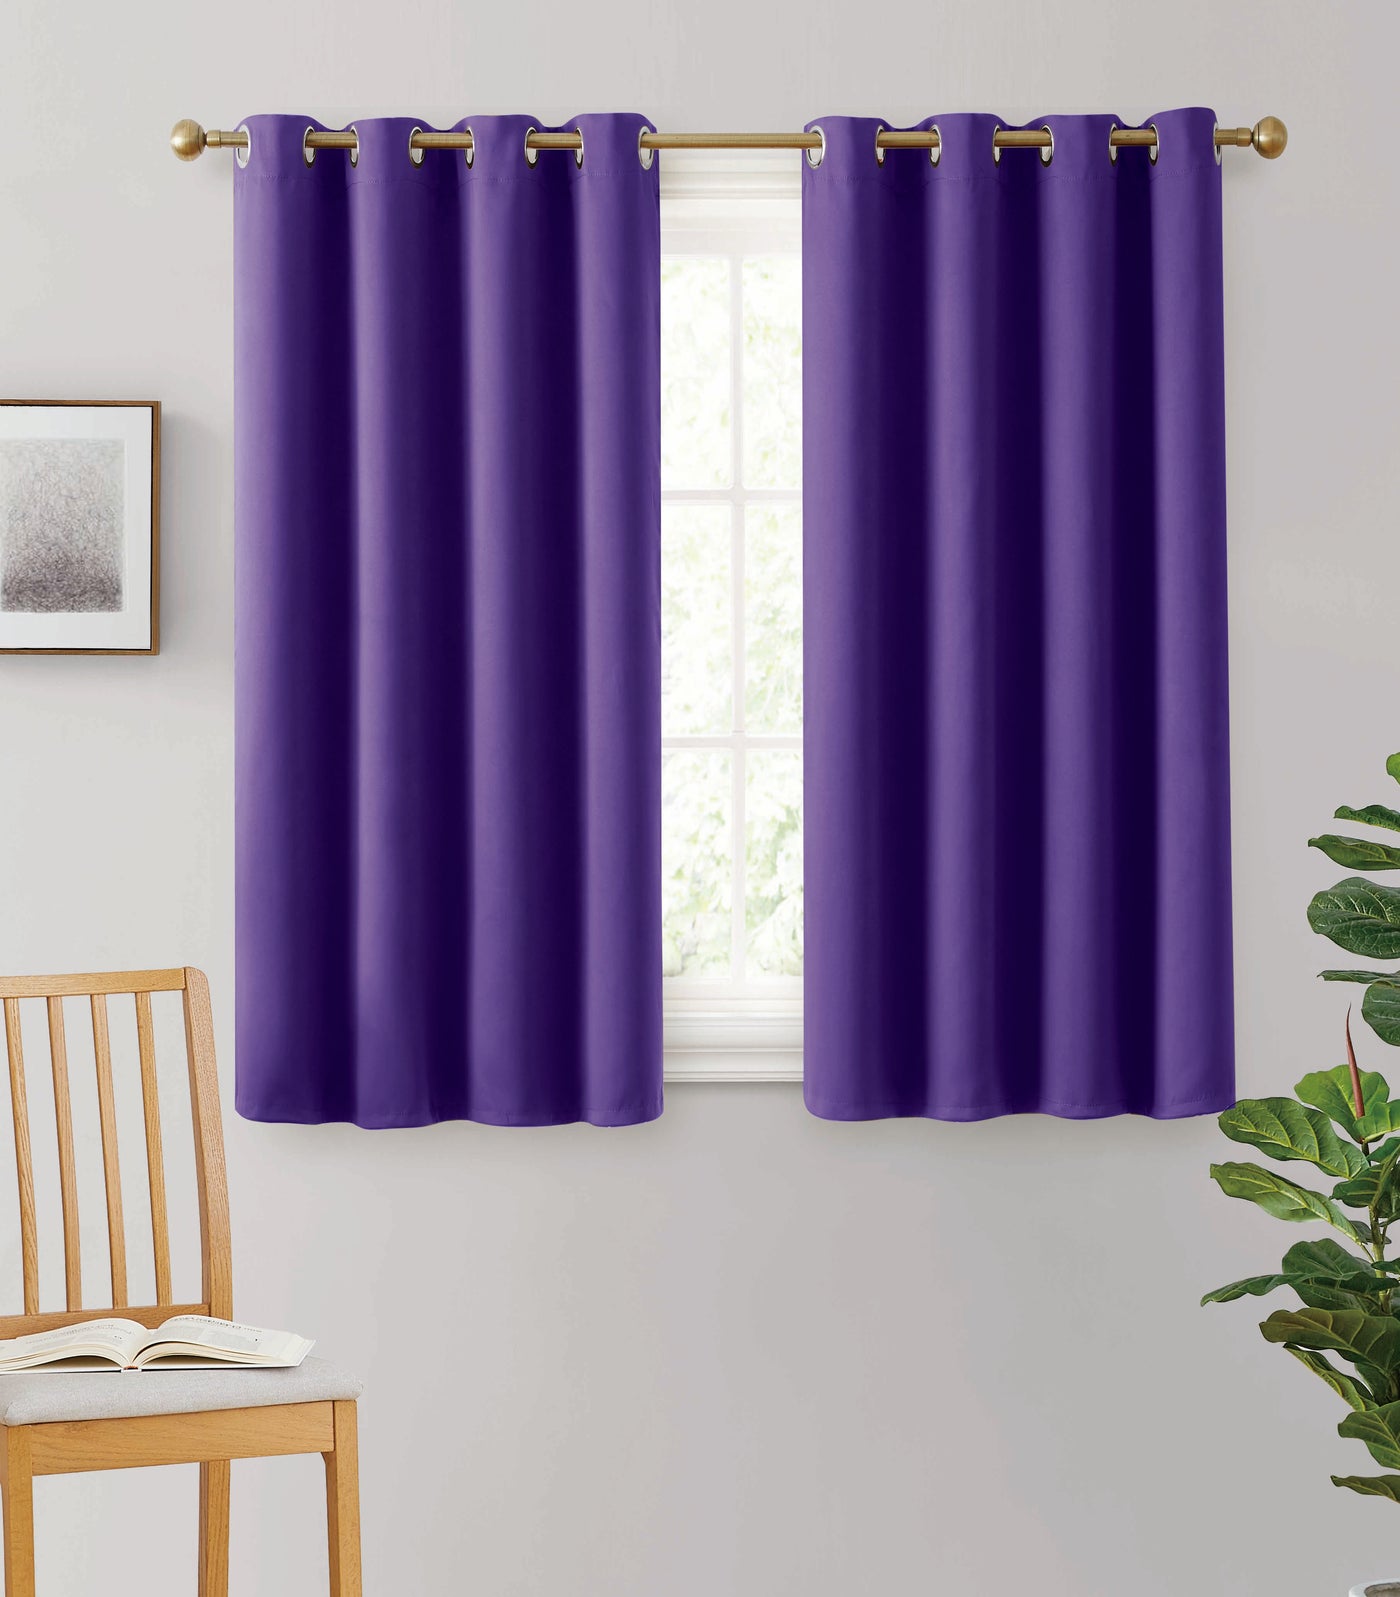 2pc Solid Grommet Thermal Insulated Window Curtain Panels Room Darkening Blackout 54"